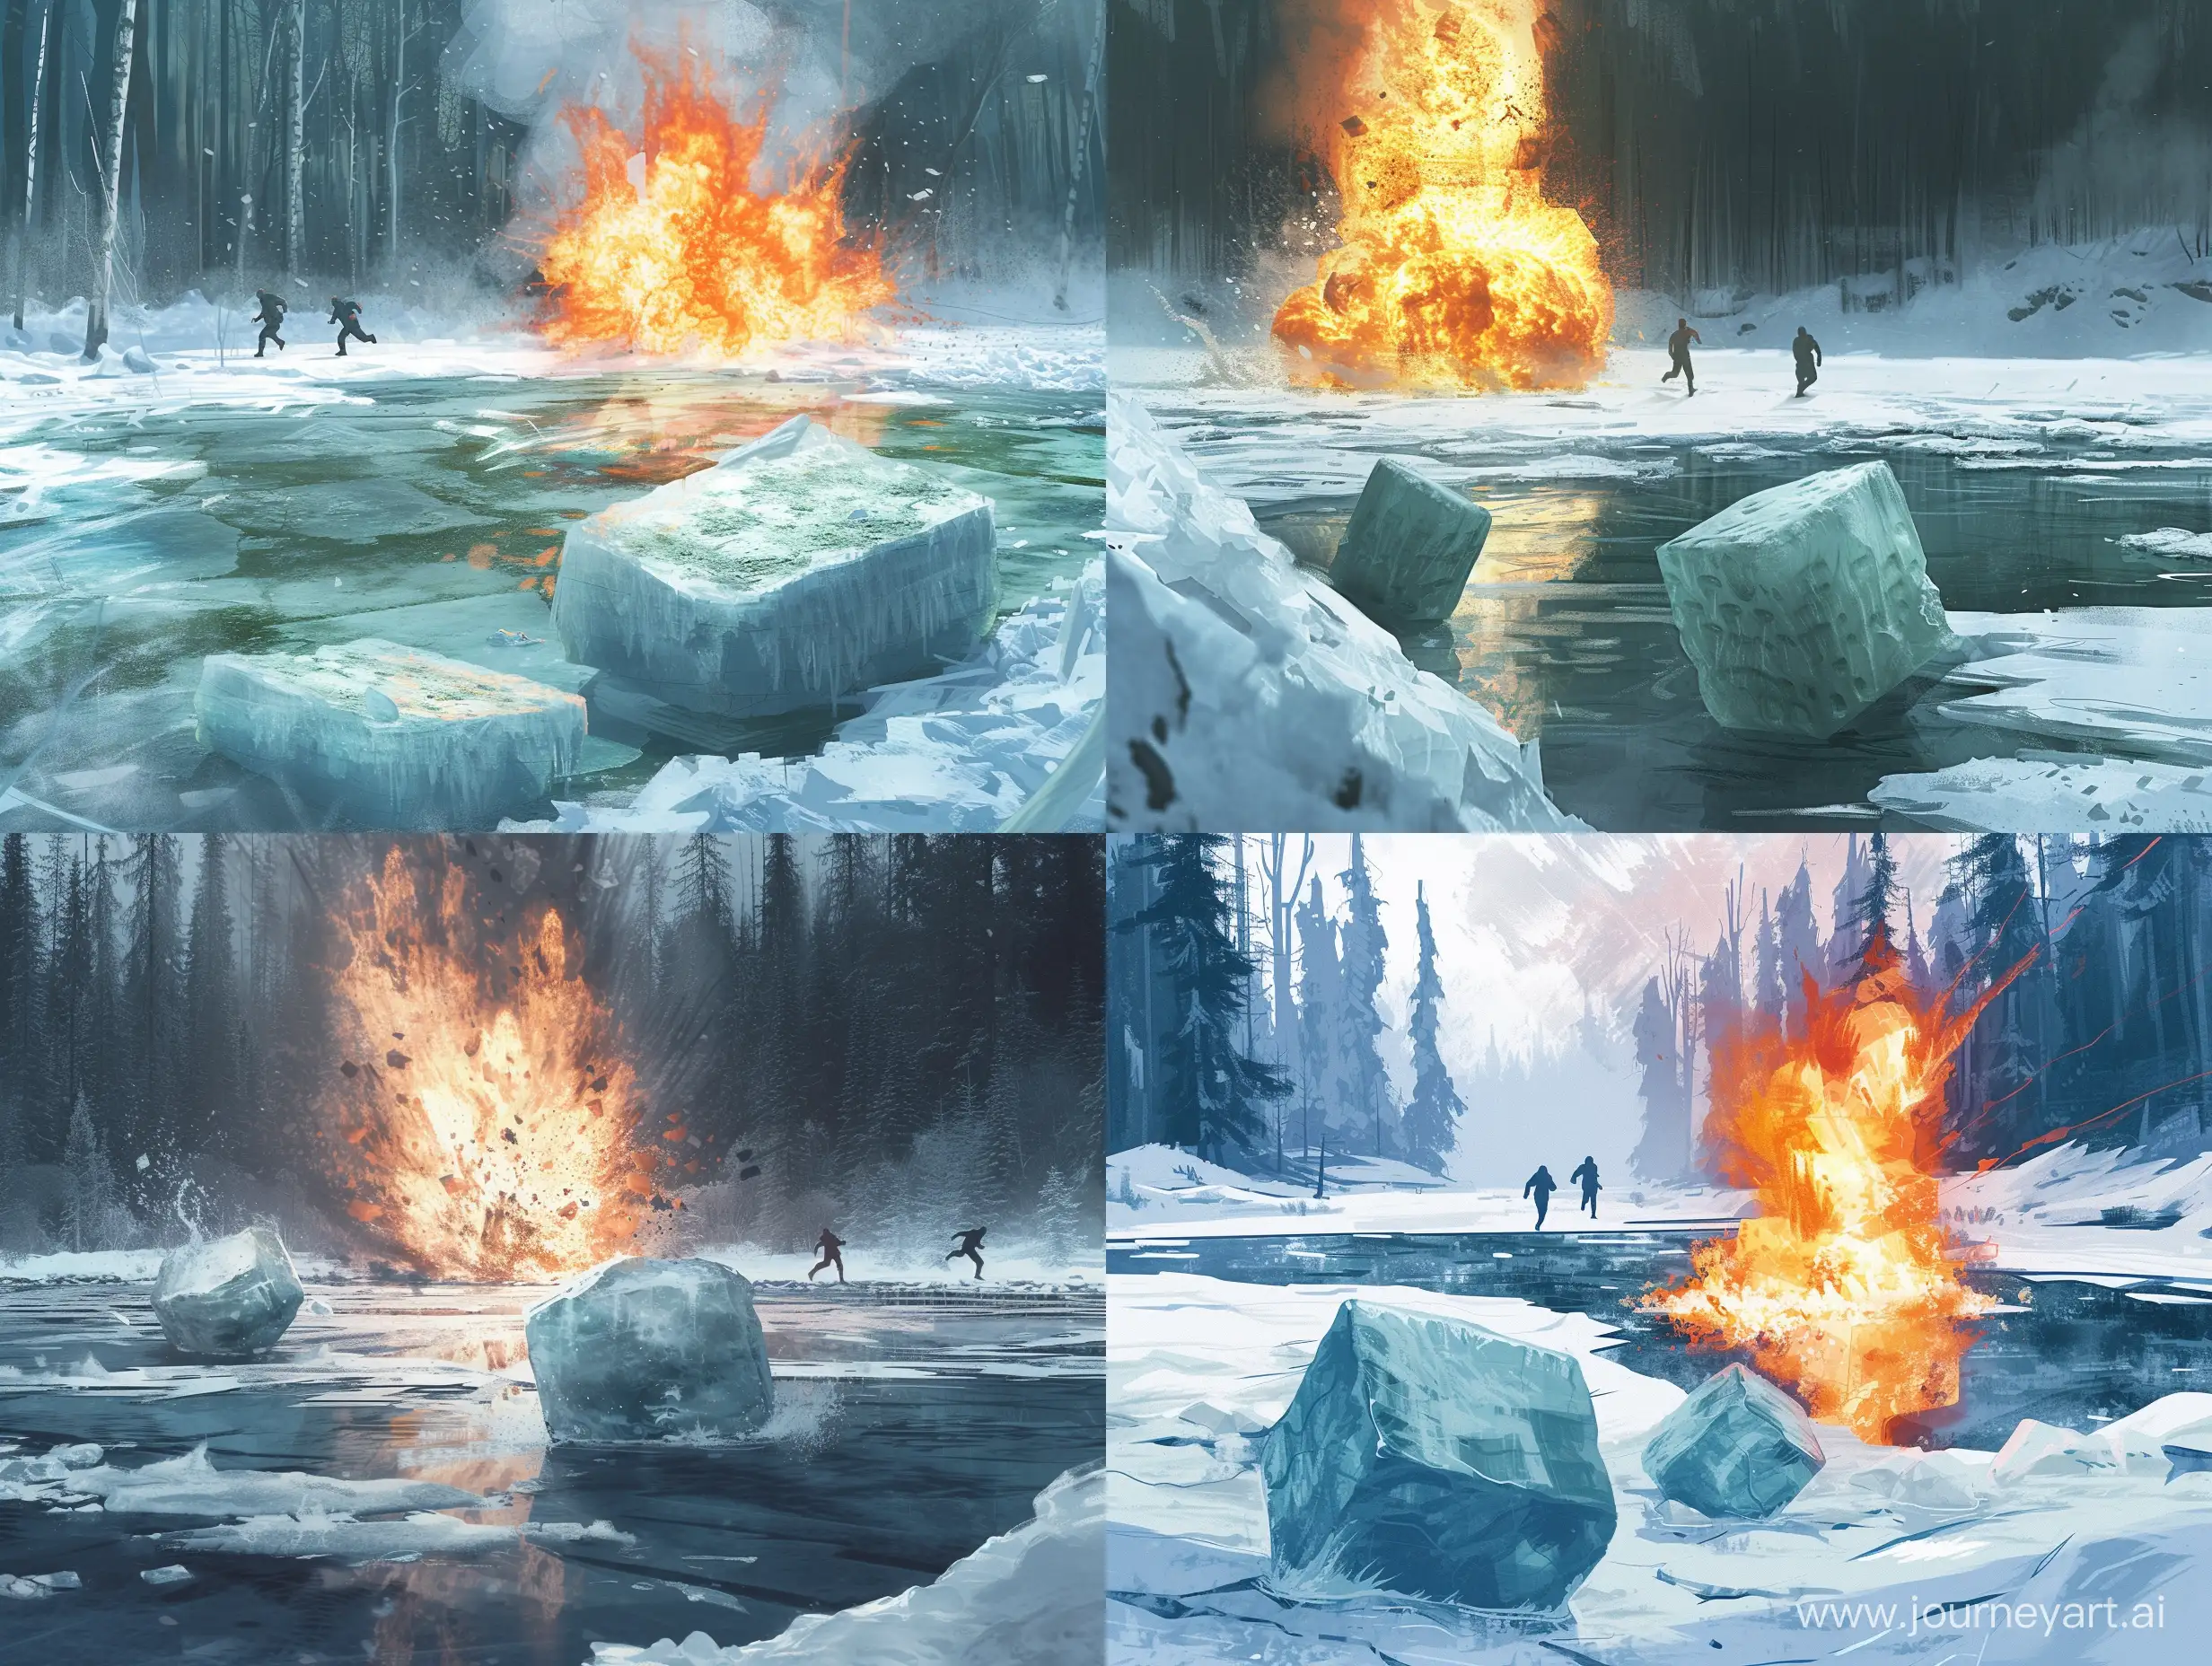 concept art, apocaliptic forest, Thermal explosion on an ice lake, two figures running in the background, large scale, blocks of ice